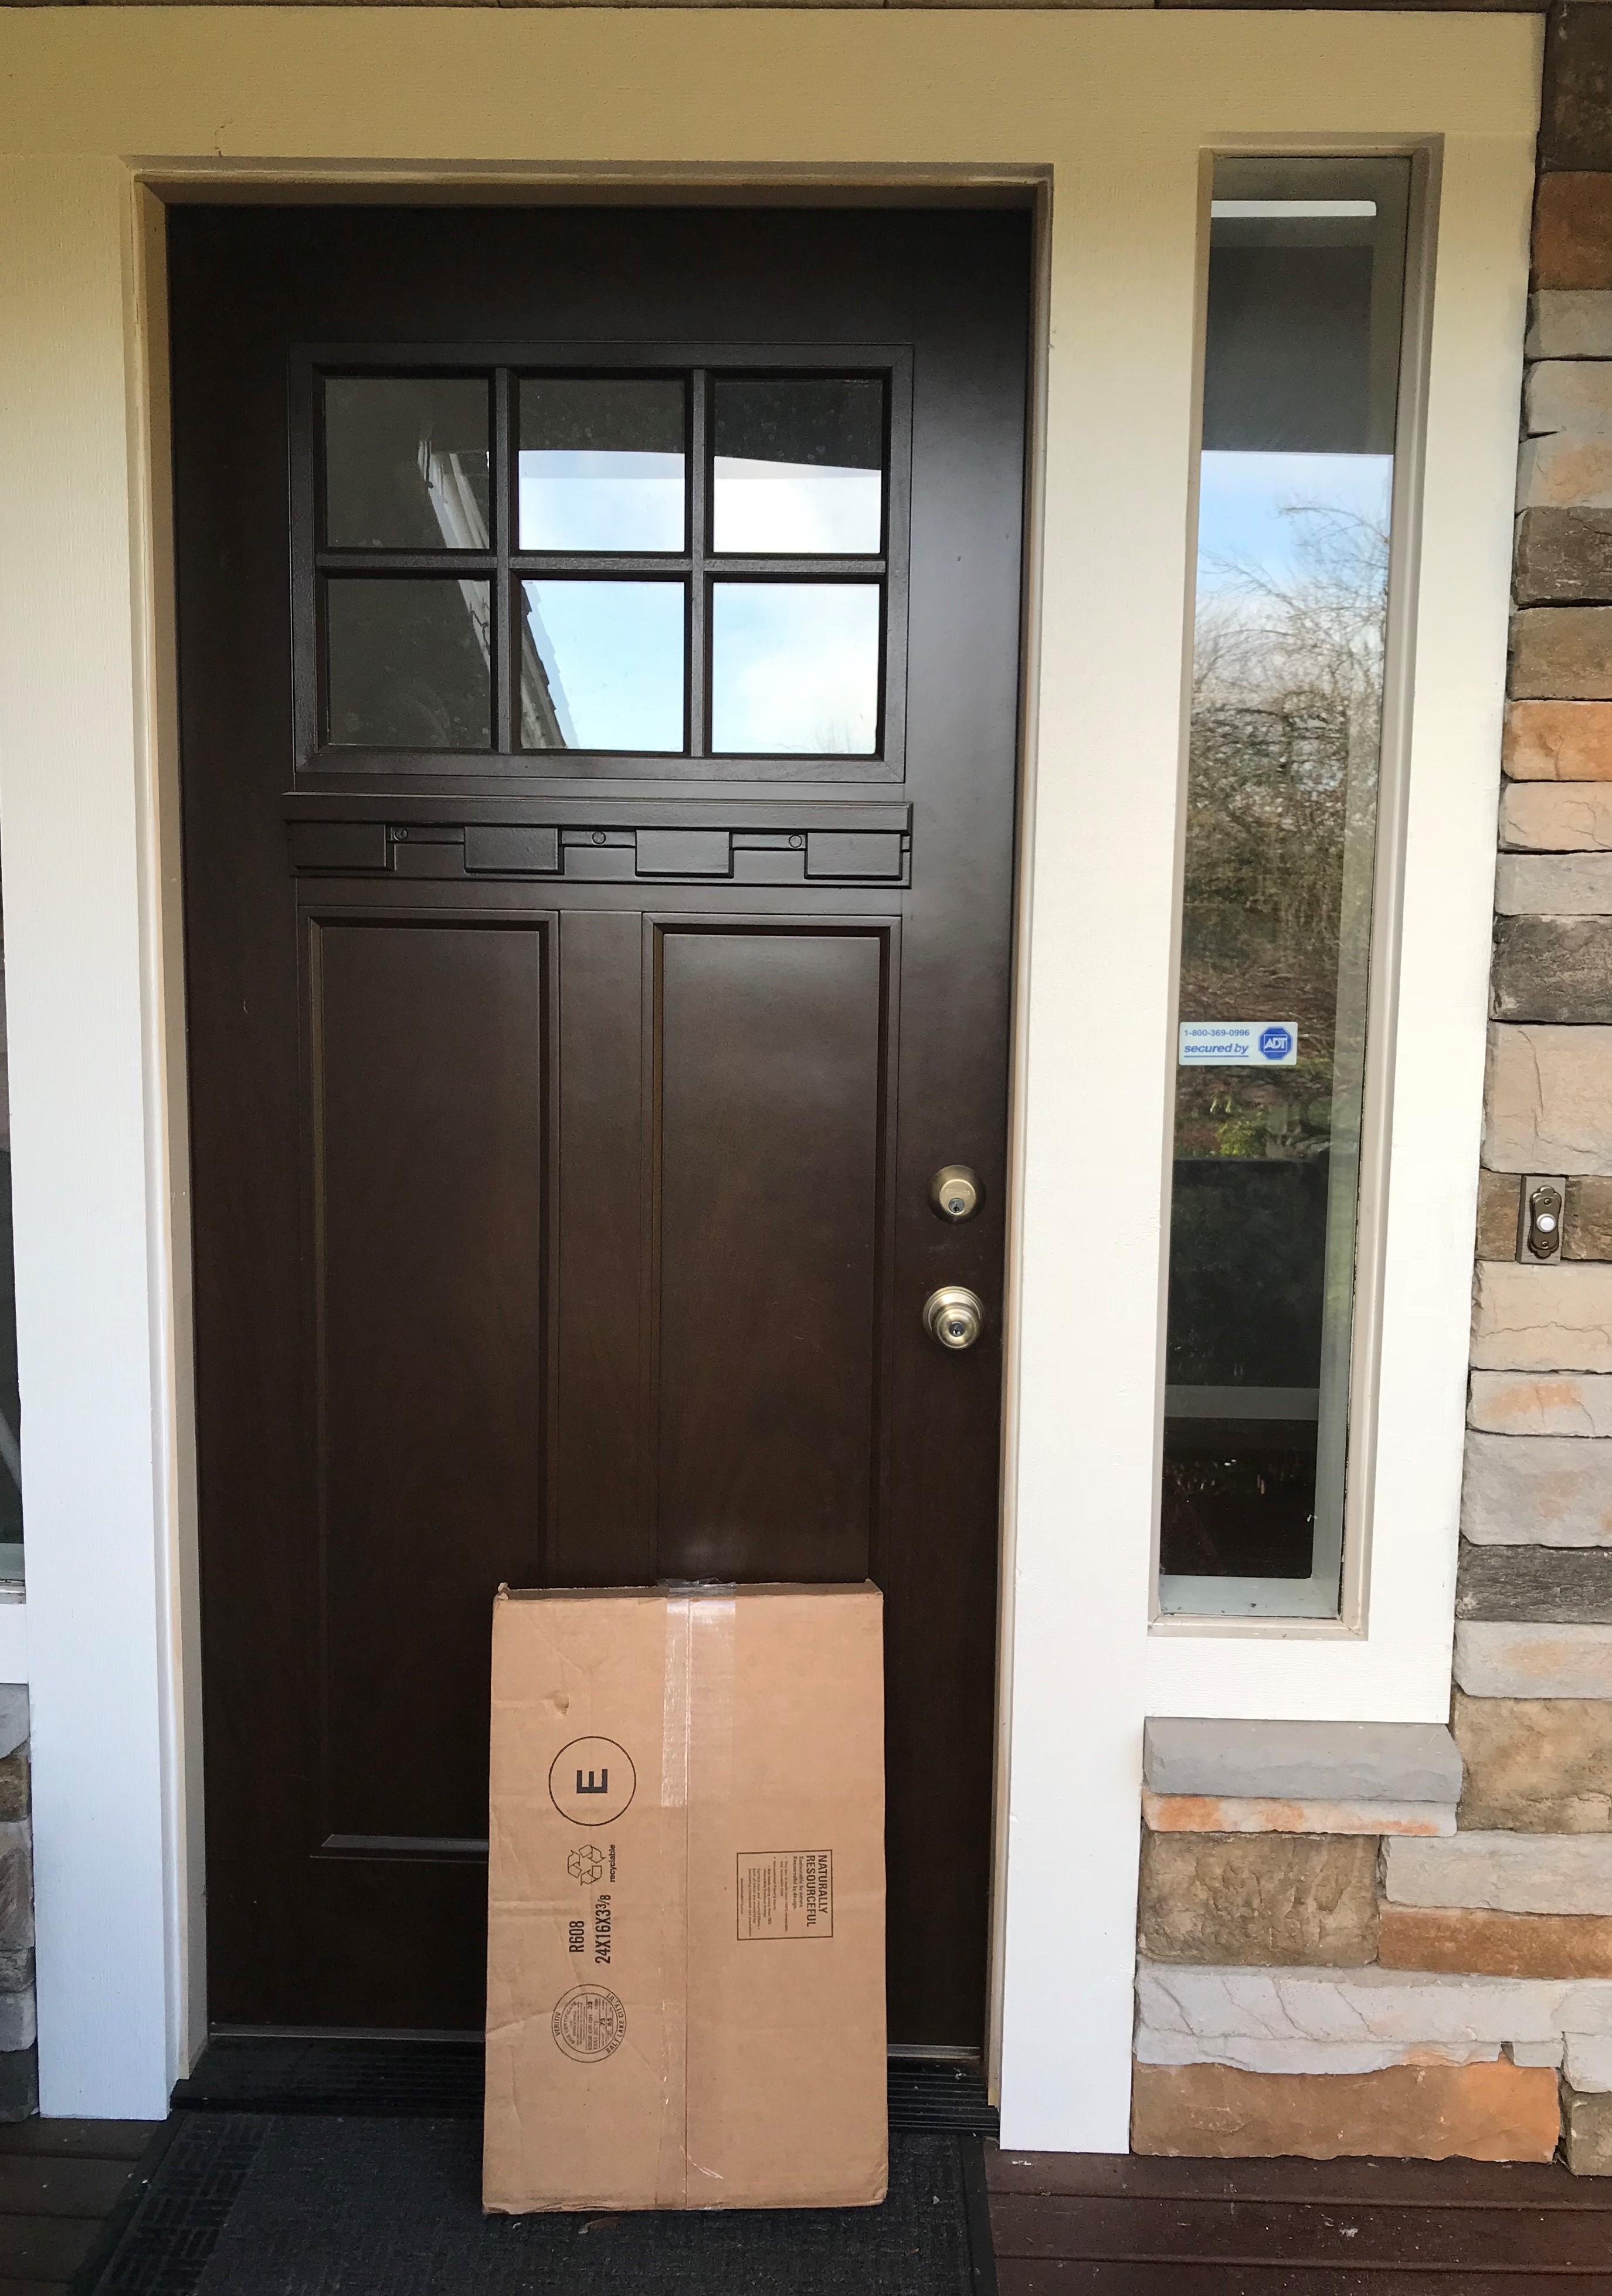 How to avoid holiday package theft in Salt Lake City, UT